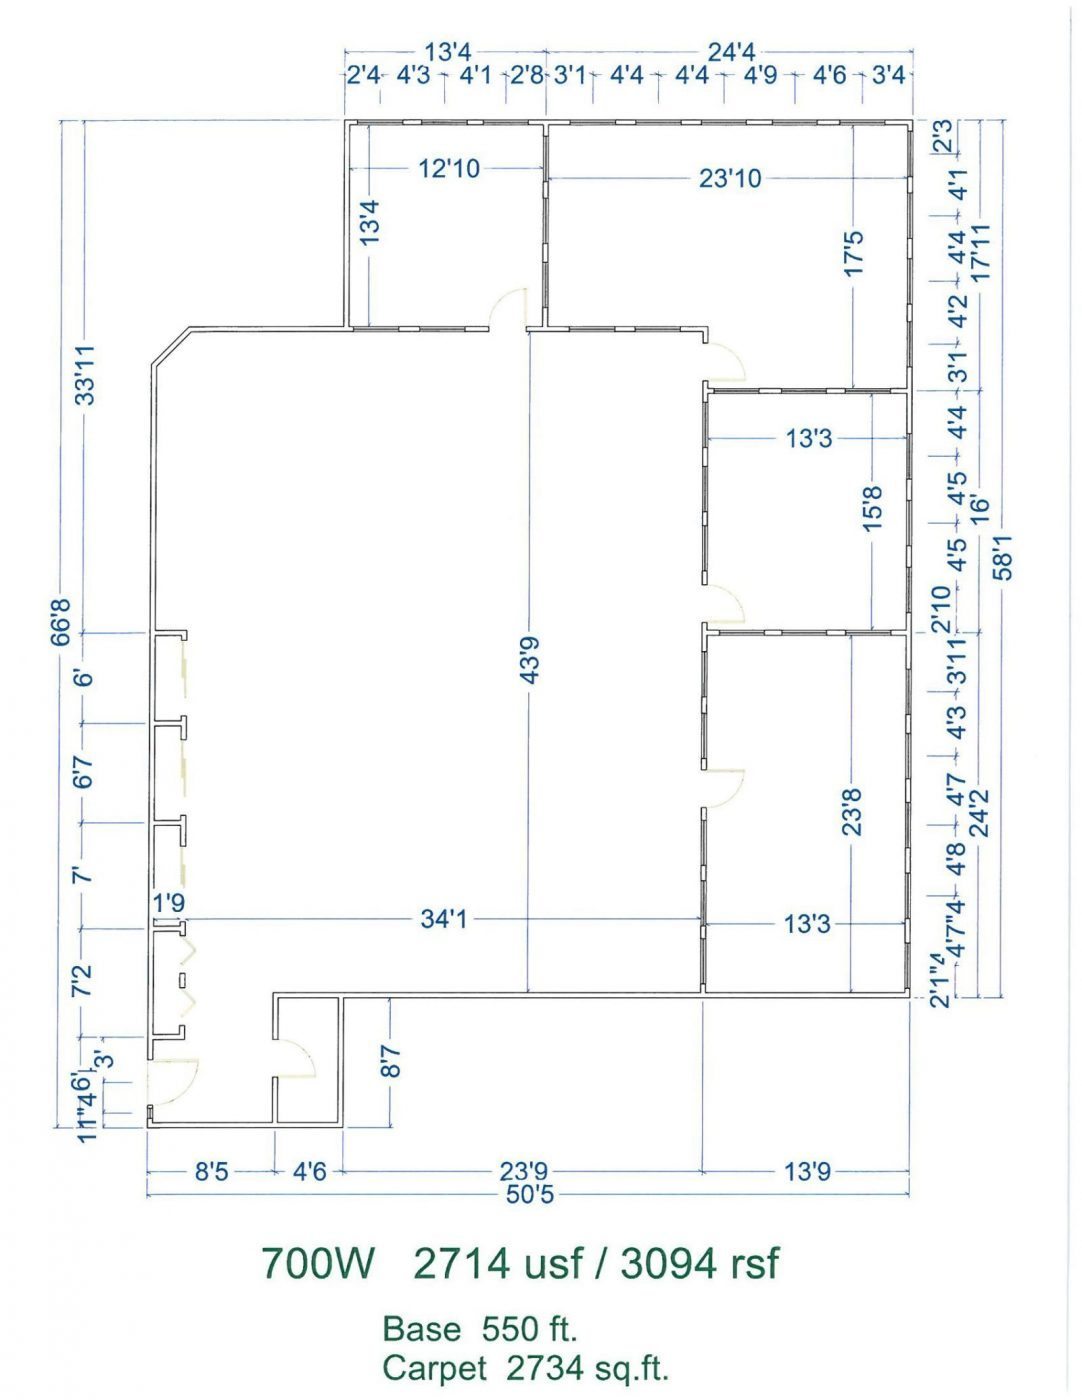 Floor Plan for unit 700W at 15565 Northland Dr Southfield, MI 48075